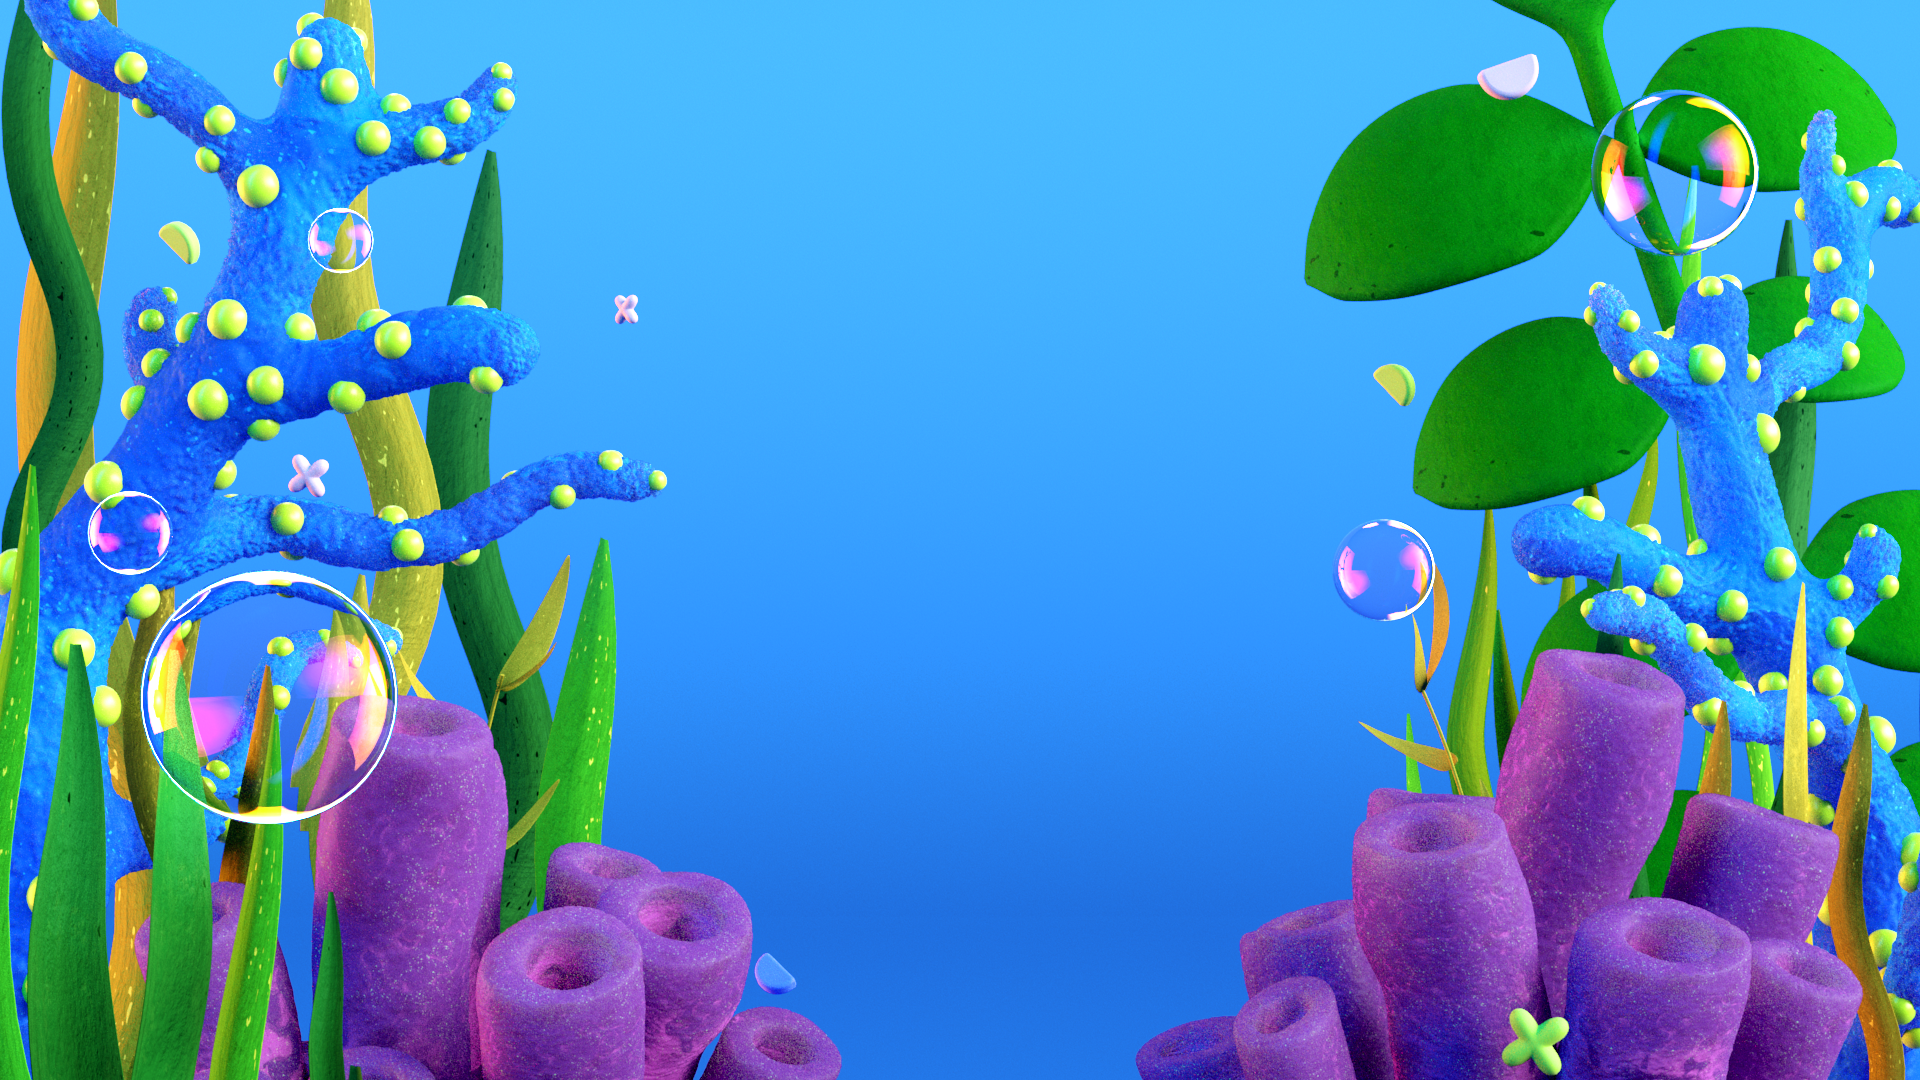 KK_CE_0XX_SOLID_BG_CORAL_FRAME_0410a.png